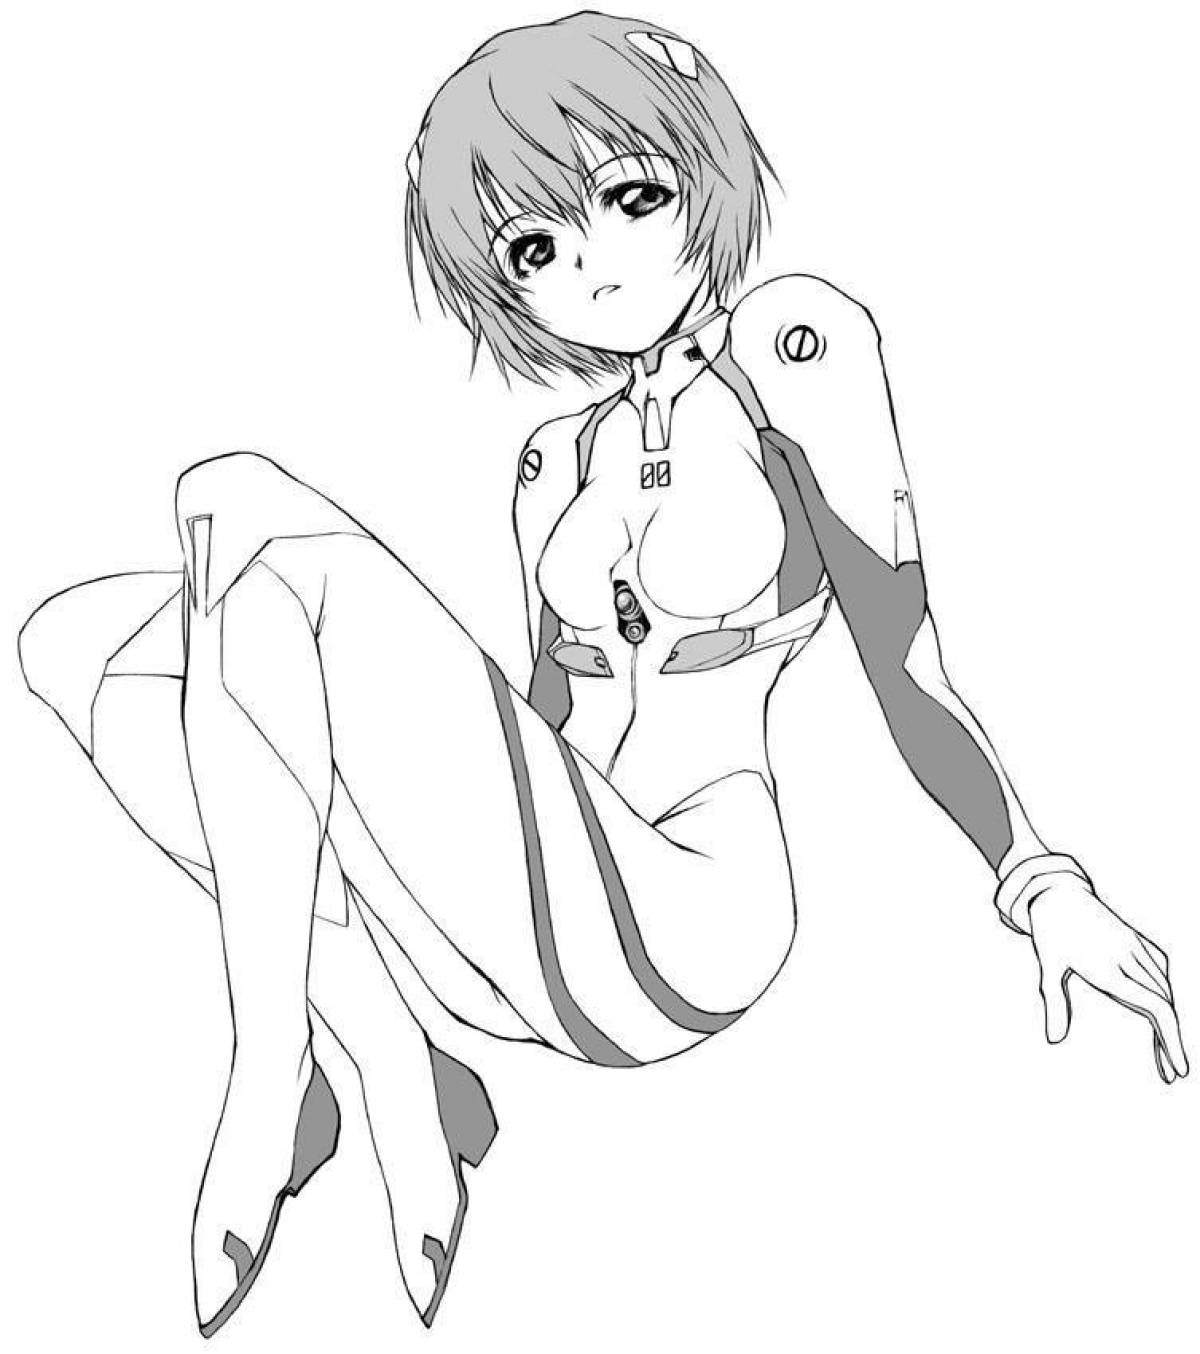 Ayanami Rei's adorable coloring page